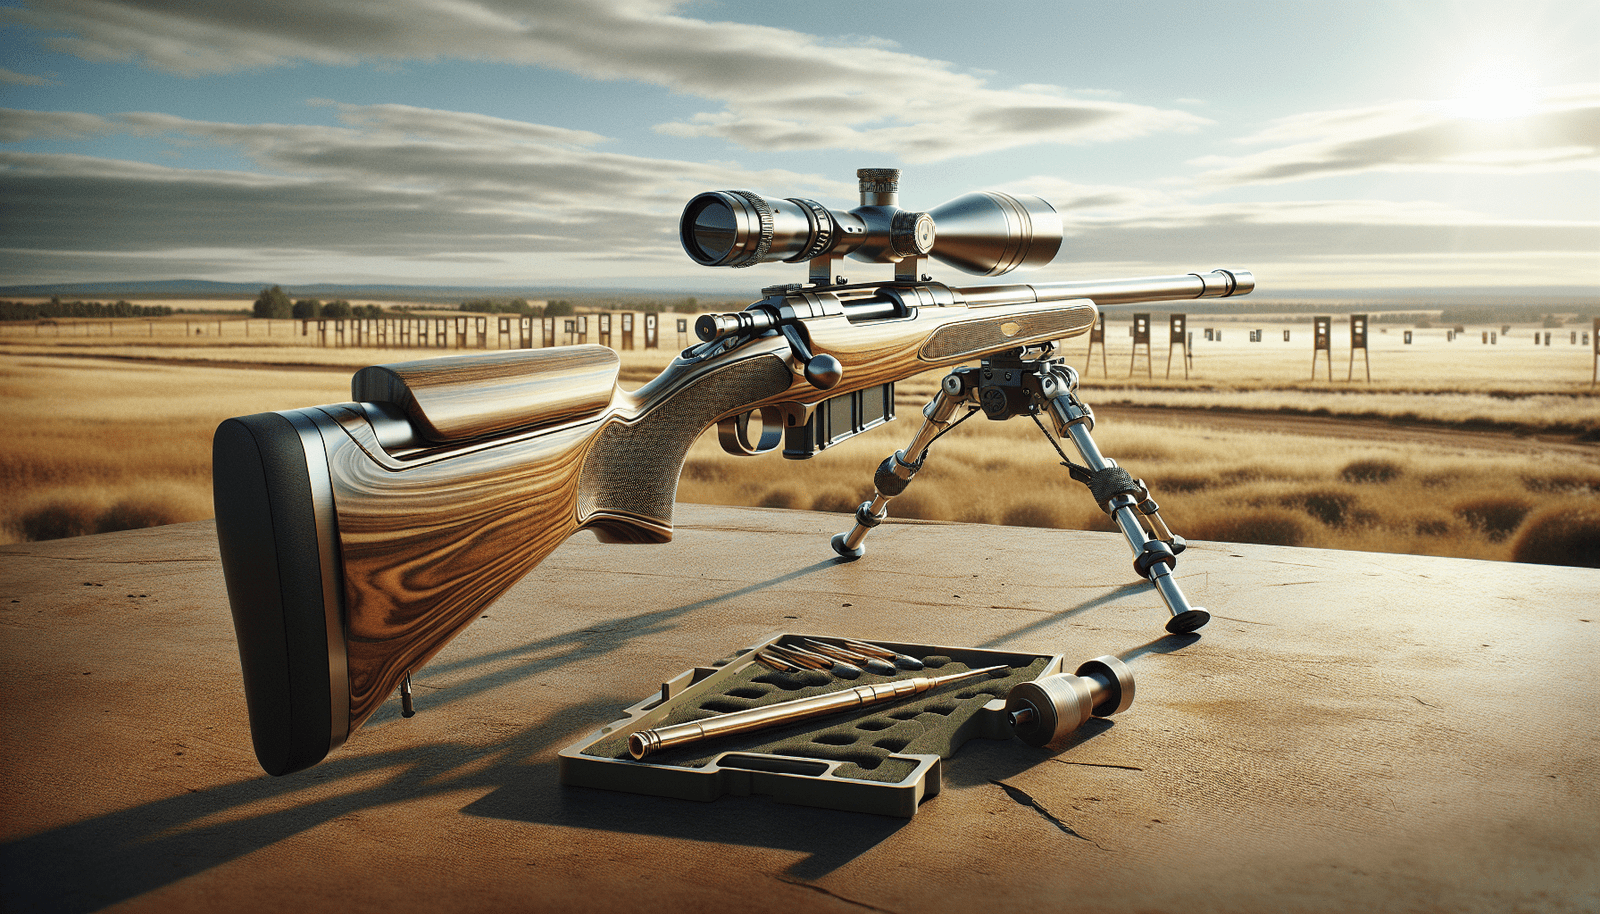 Buyer’s Guide For Choosing The Right Rifle For Long Range Competitions